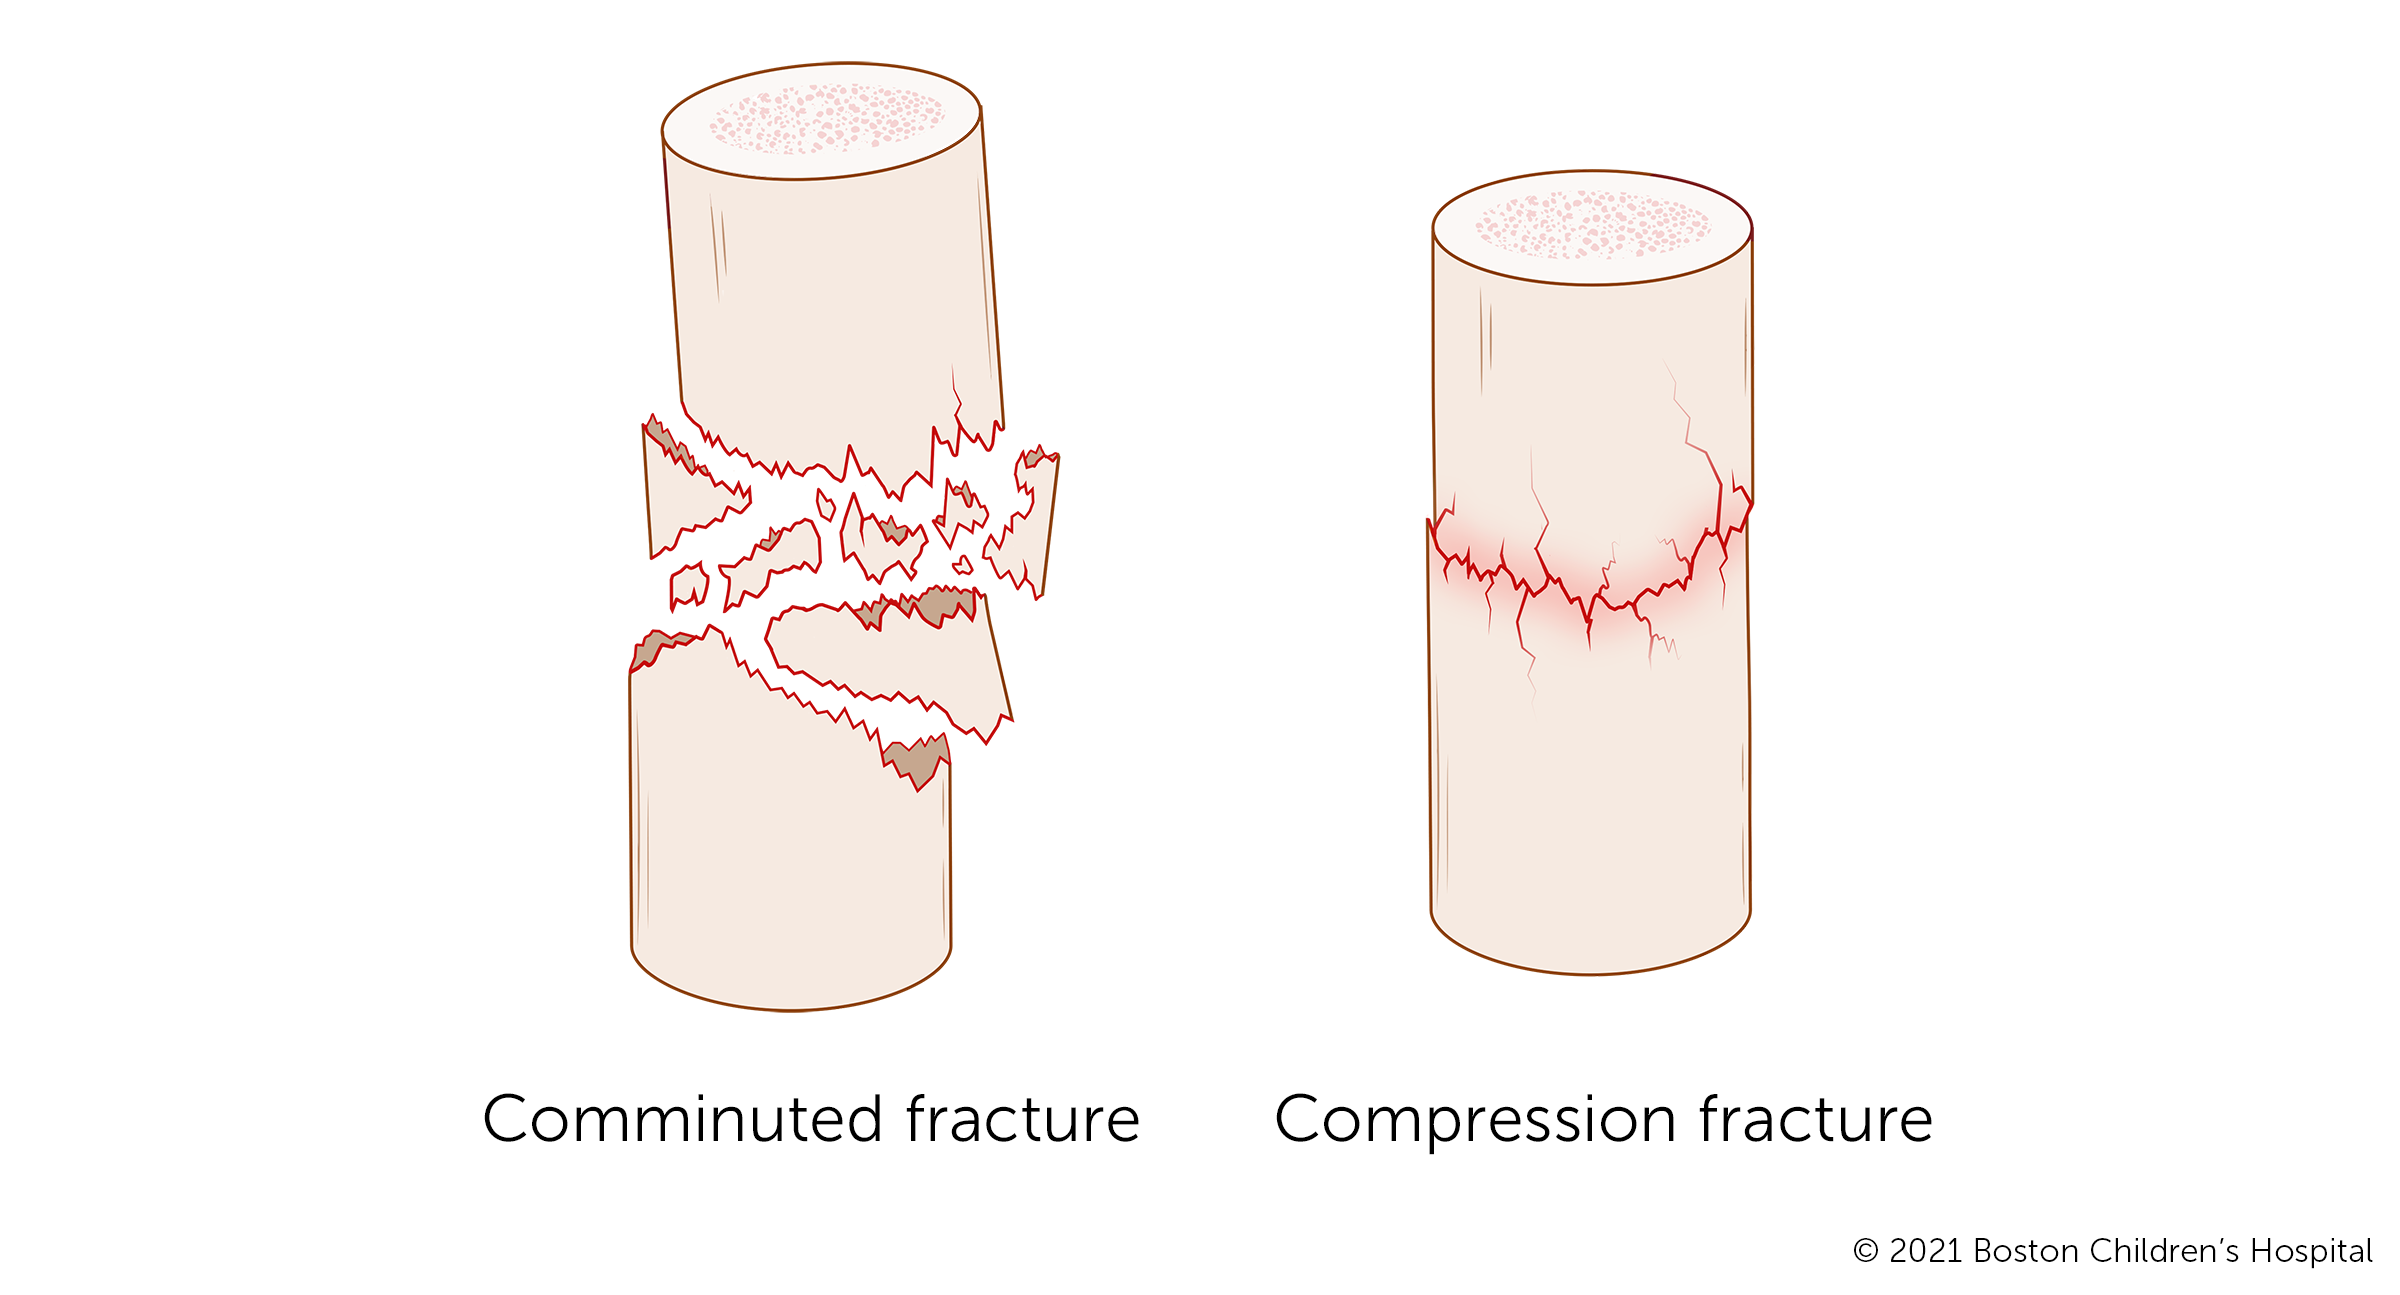 An illustration of severe fractures